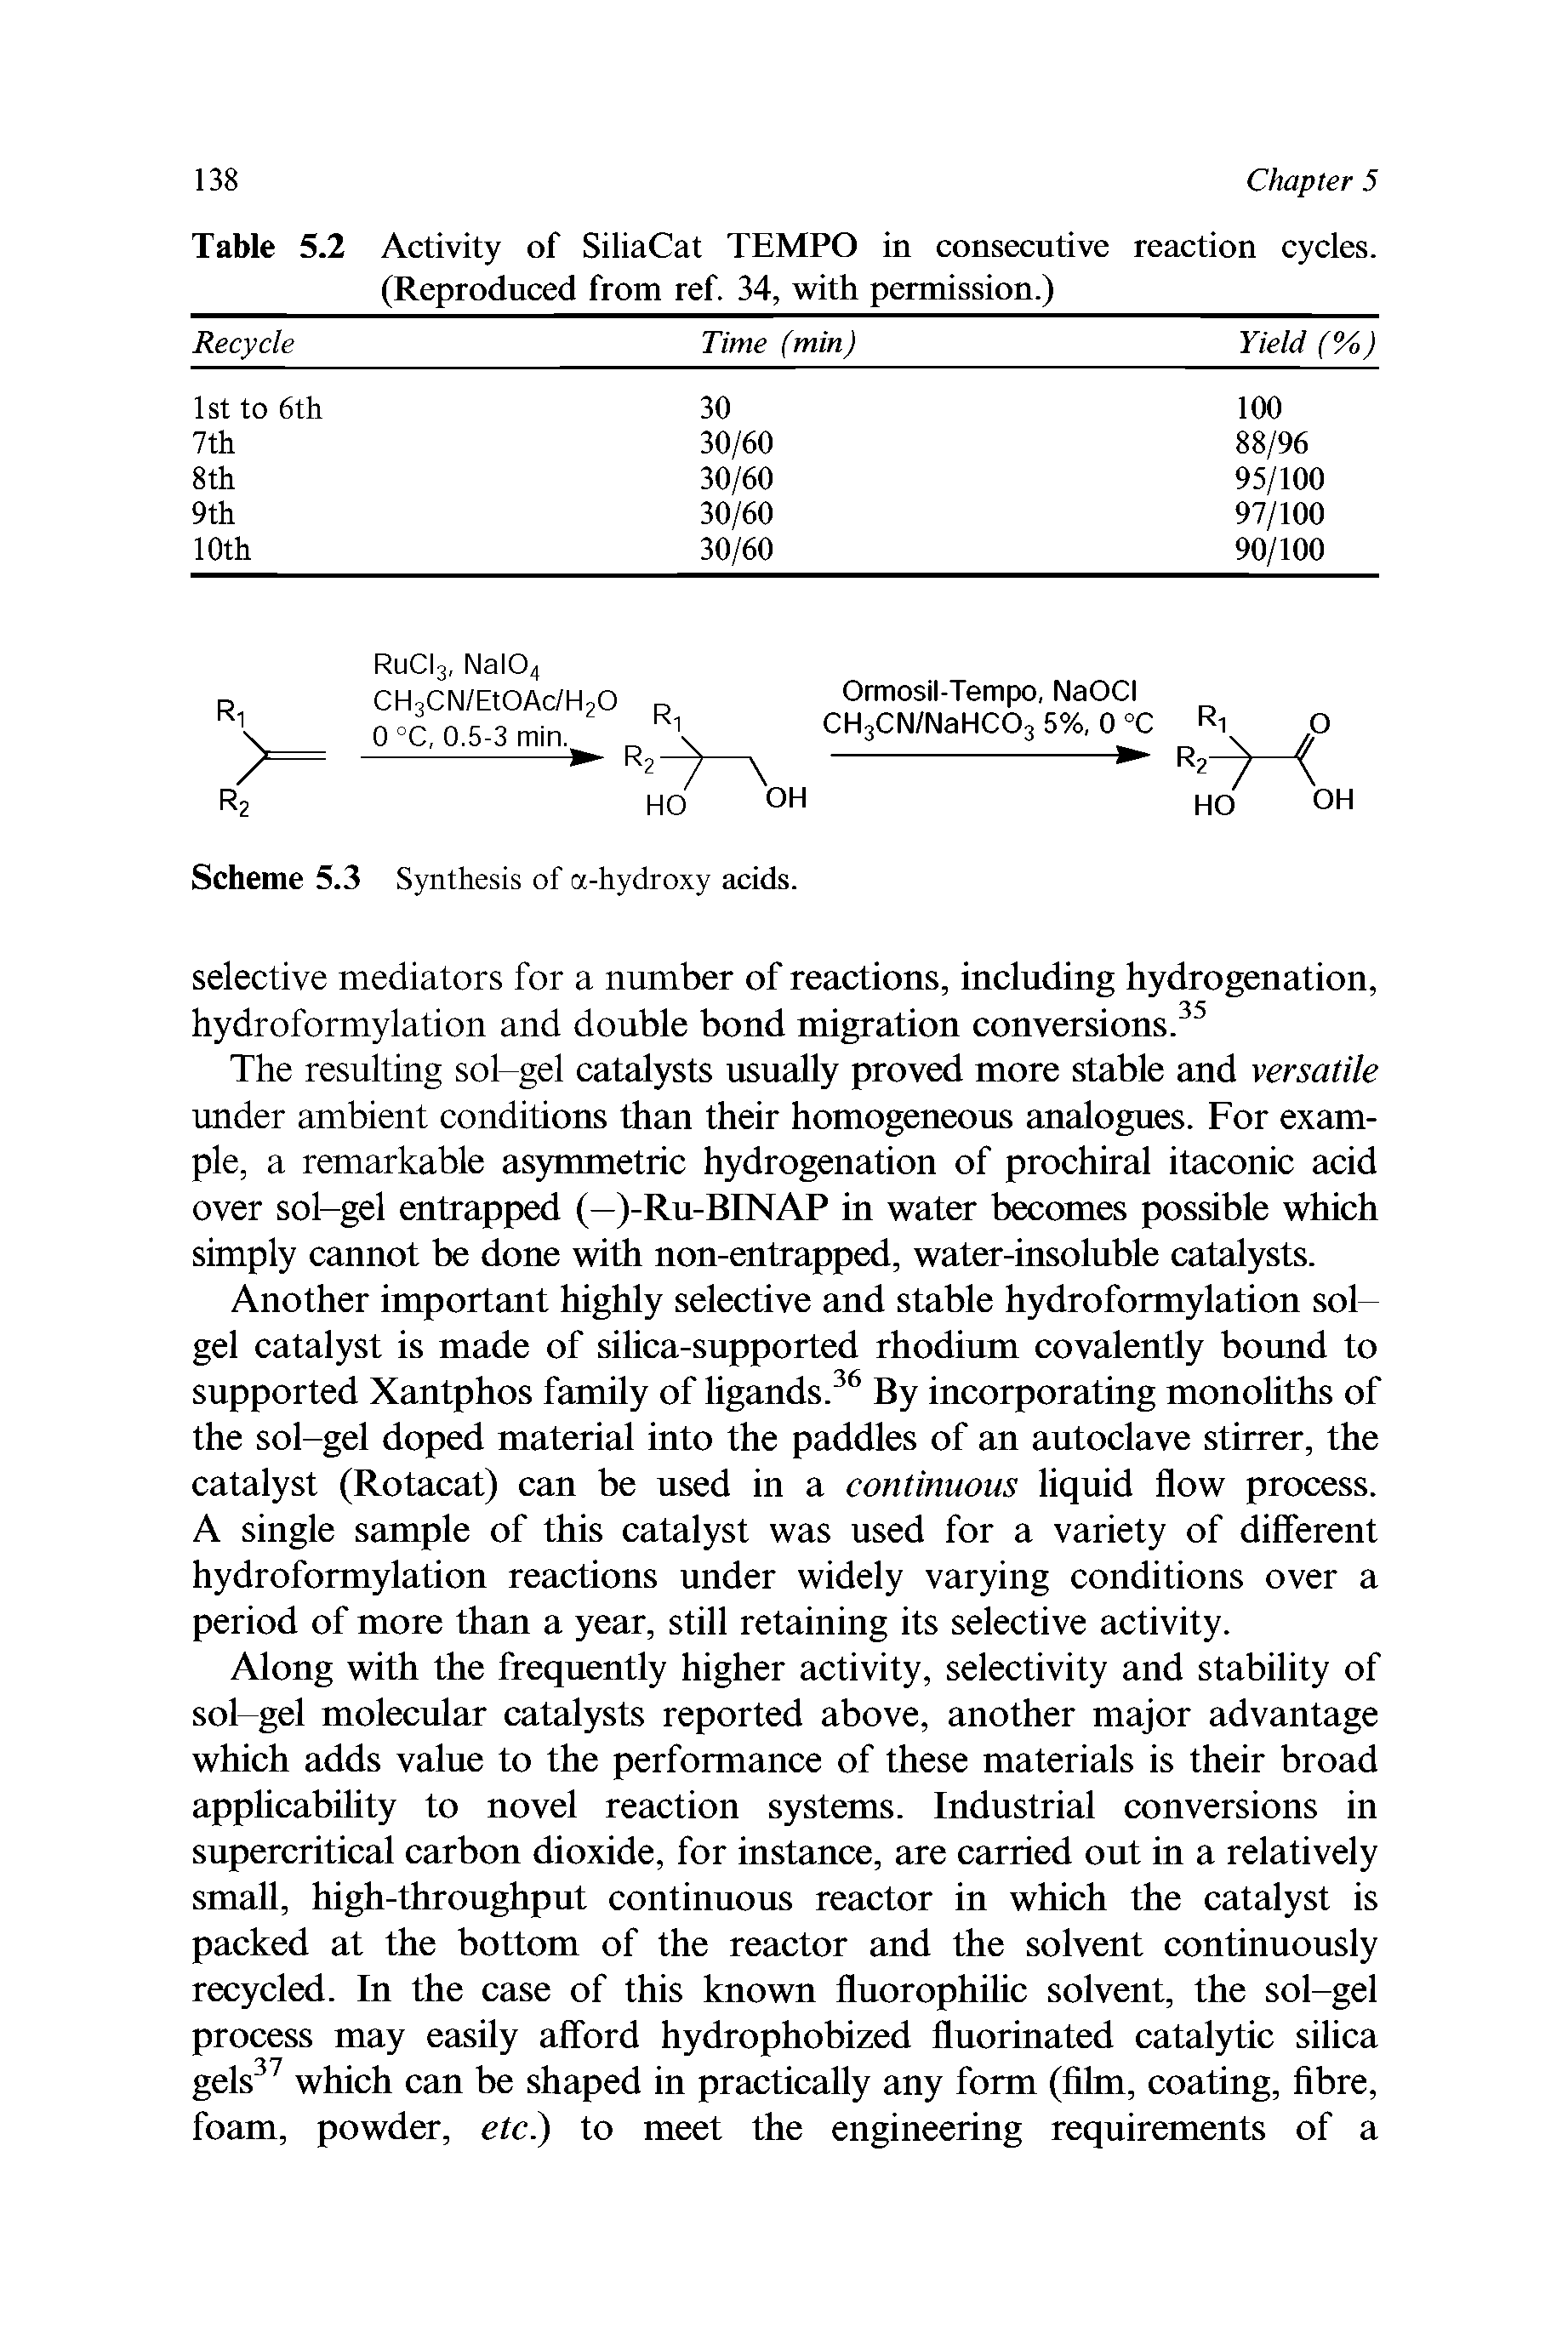 Table 5.2 Activity of SiliaCat TEMPO in consecutive reaction cycles.